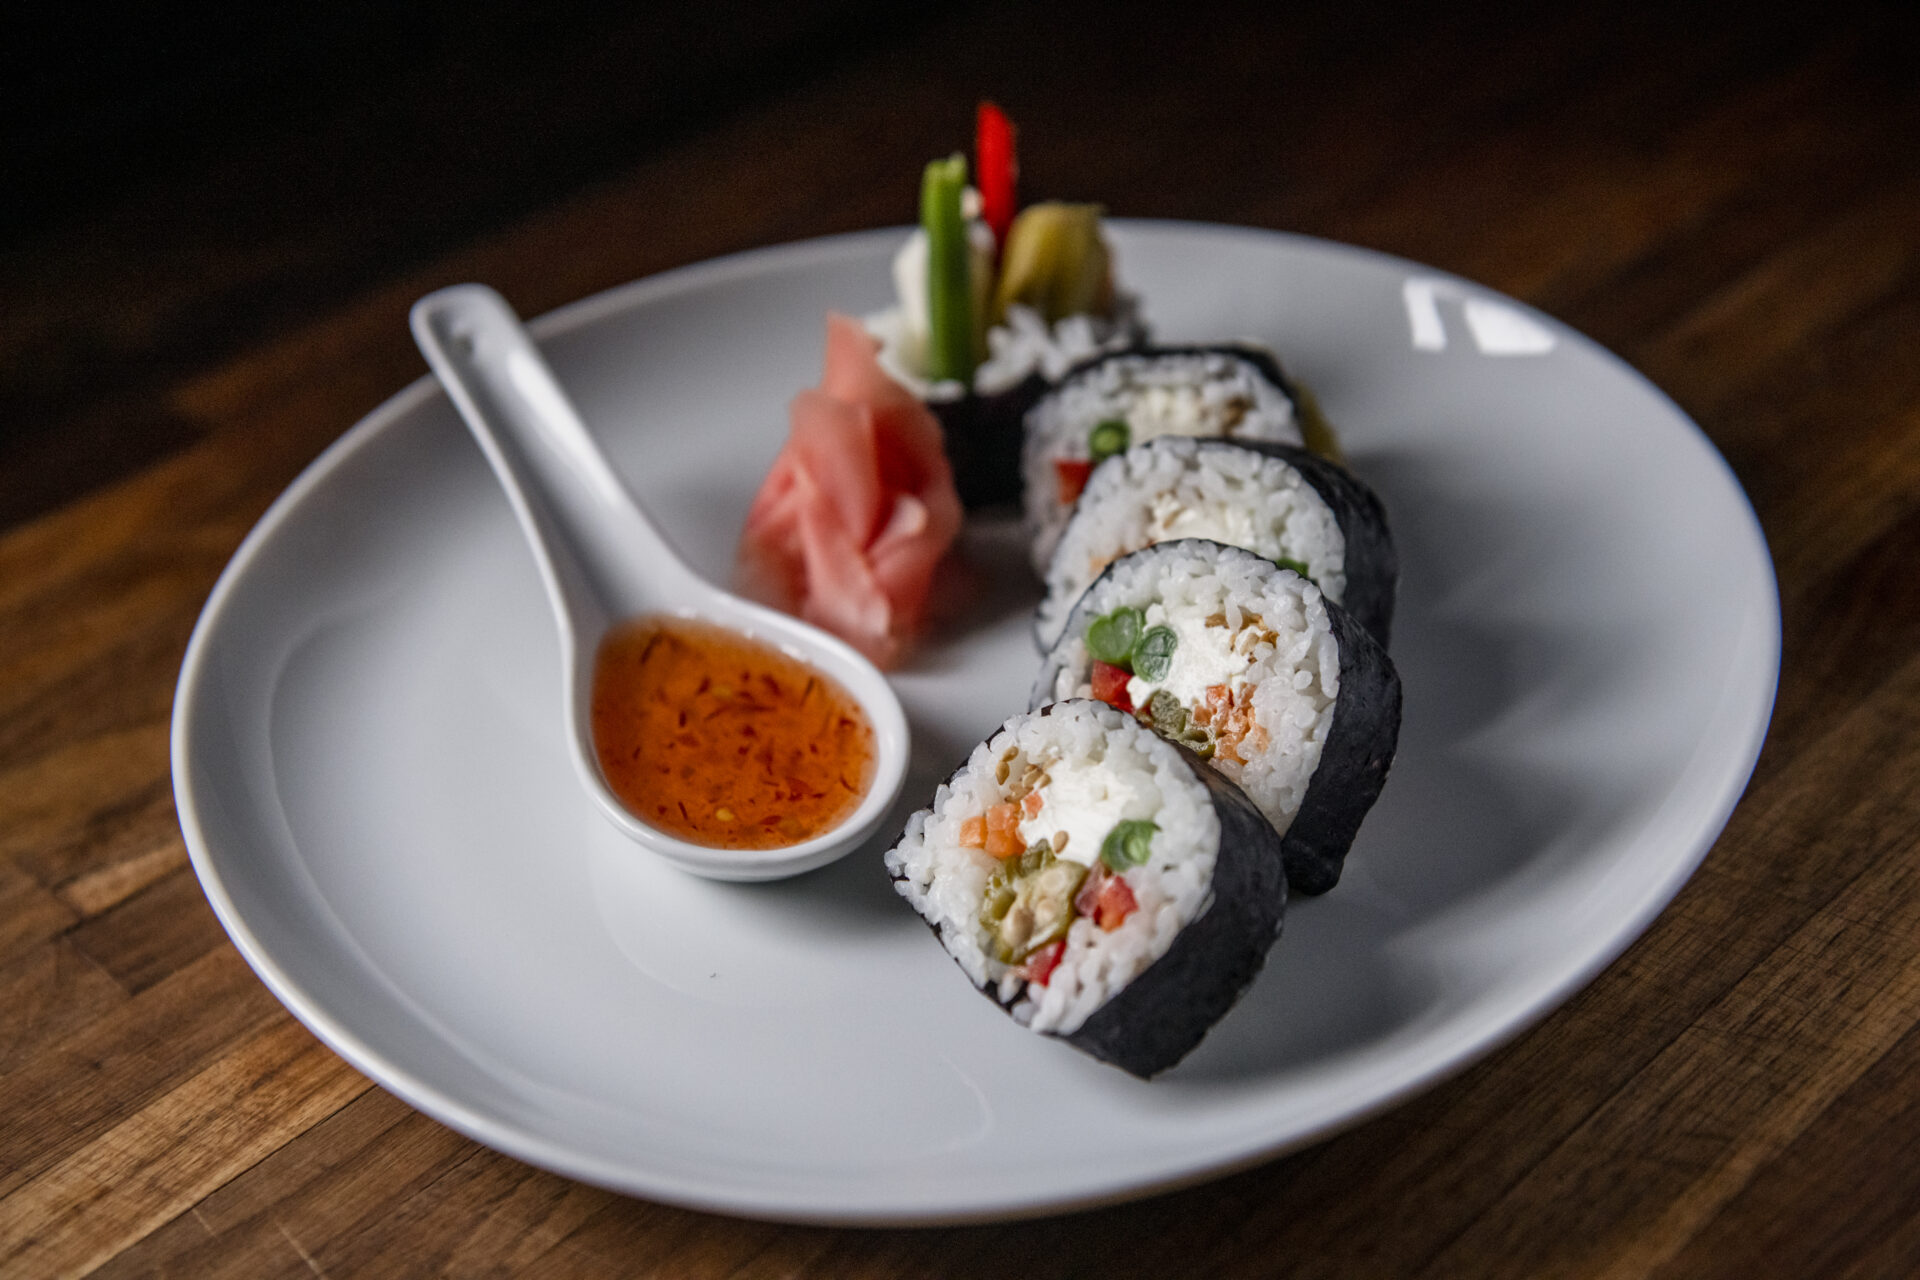 Five sushi rolls sit on a white plate with a spoon full of sauce.